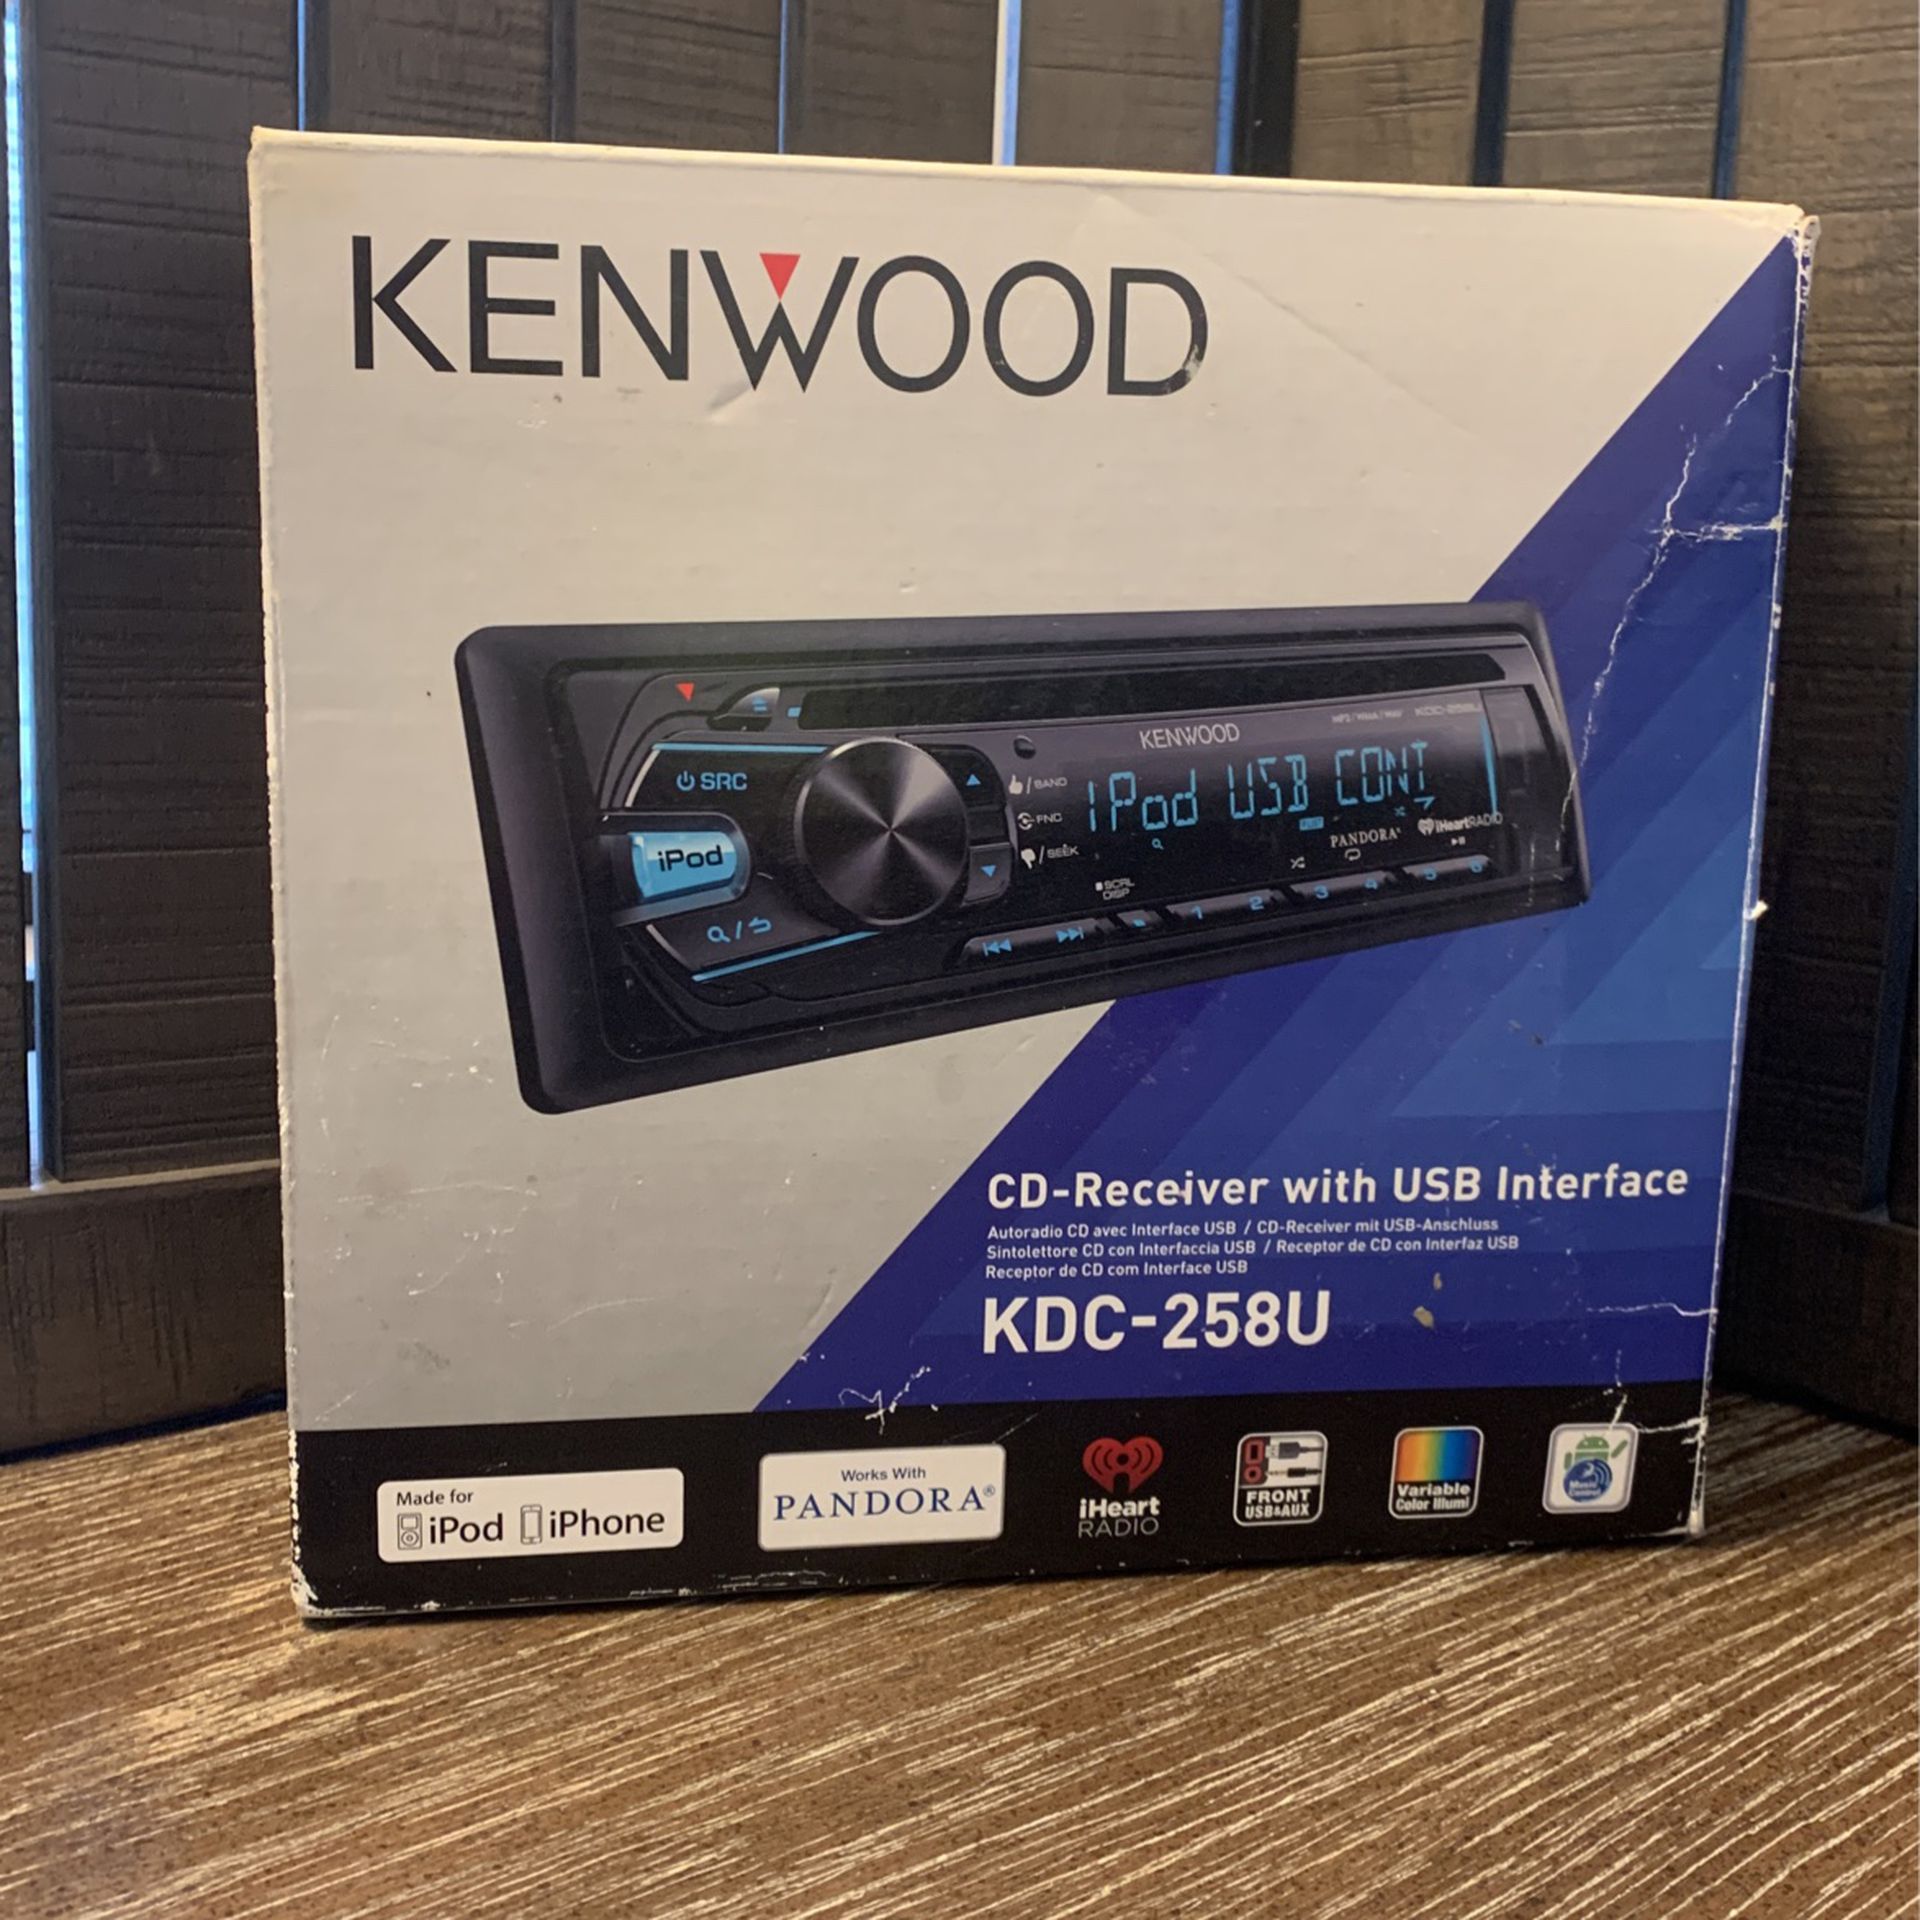 Kenwood CD receiver with USB Interface